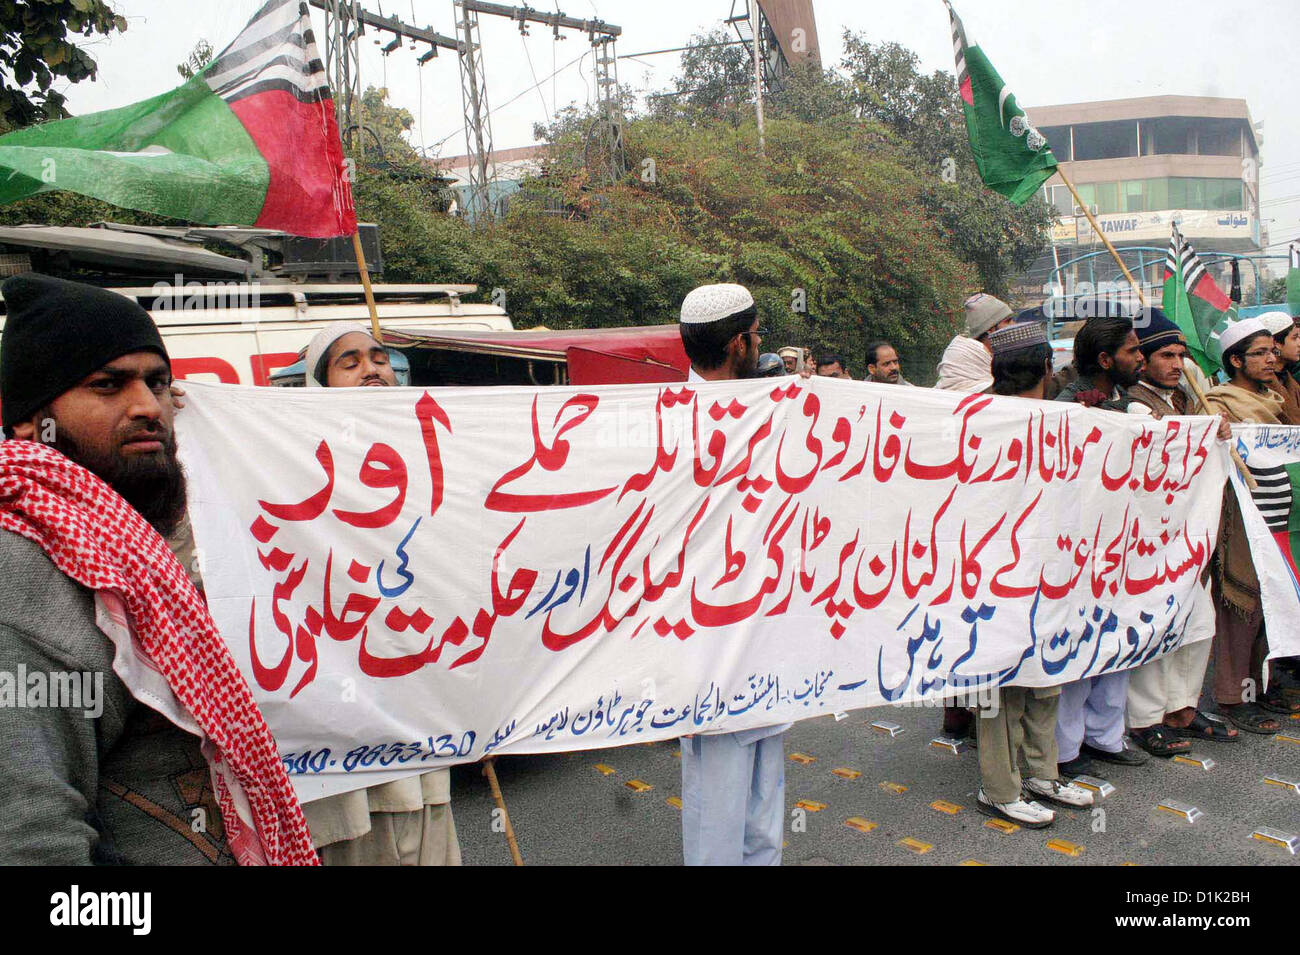 Activists of Ahle Sunnat Wal Jamat (Defunct Sipah-e-Sahaba)  chant slogans against an assassination attack on leader Aurangzeb Farooqi convoy and killing of  his seven gunmen including driver during a protest demonstration at Lahore press club on  Wednesday, December 26, 2012. Stock Photo